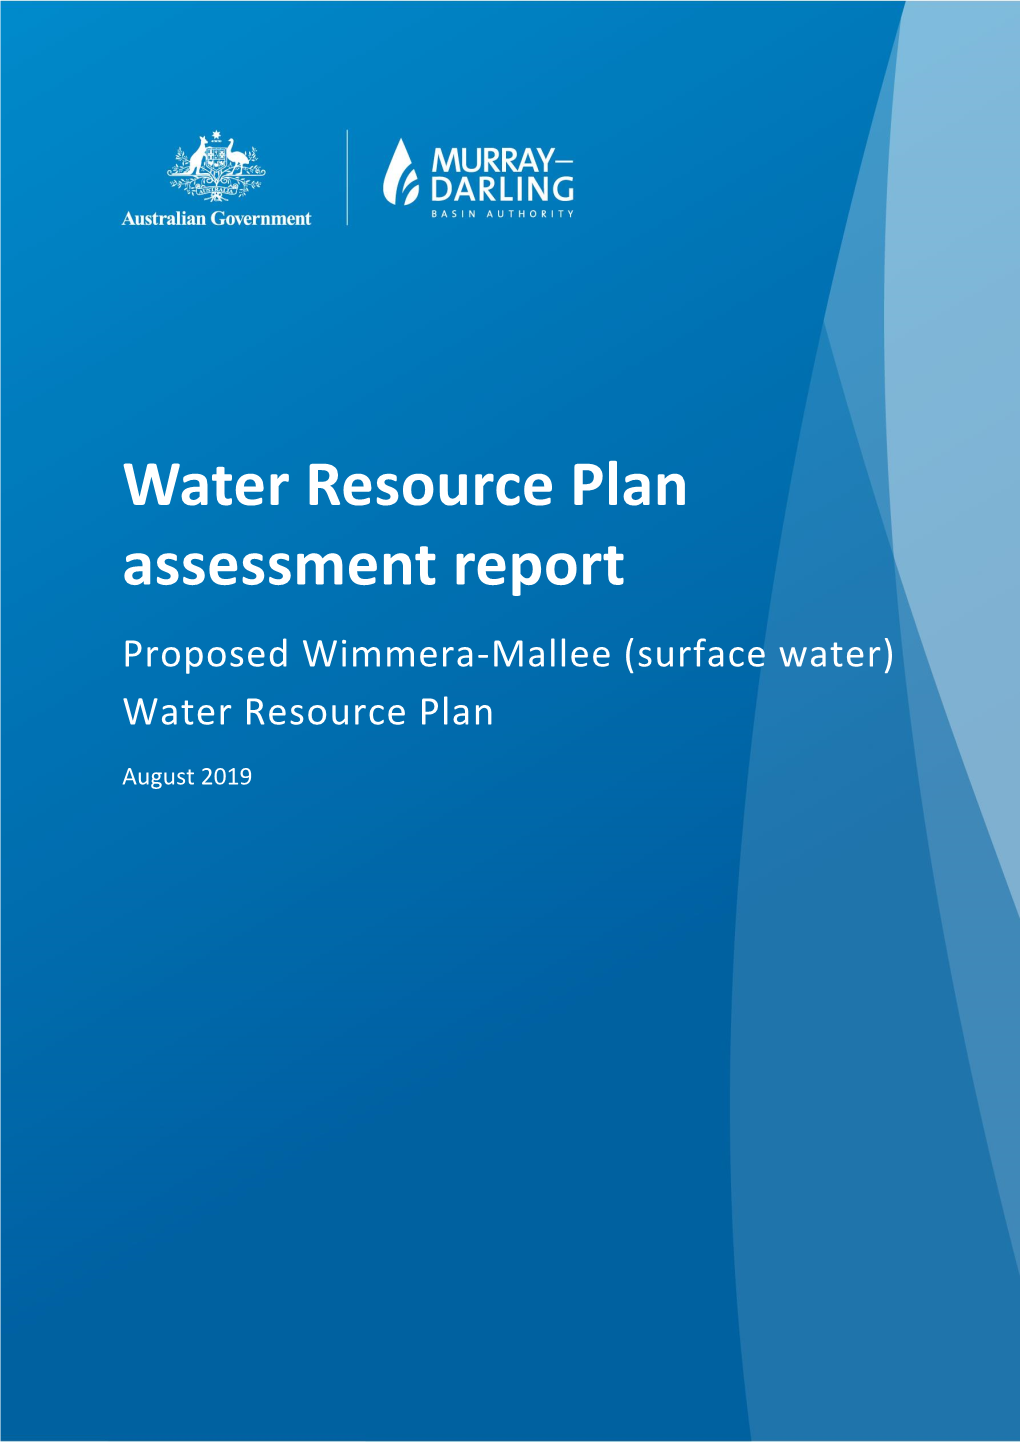 Water Resource Plan Assessment Report Proposed Wimmera-Mallee (Surface Water) Water Resource Plan